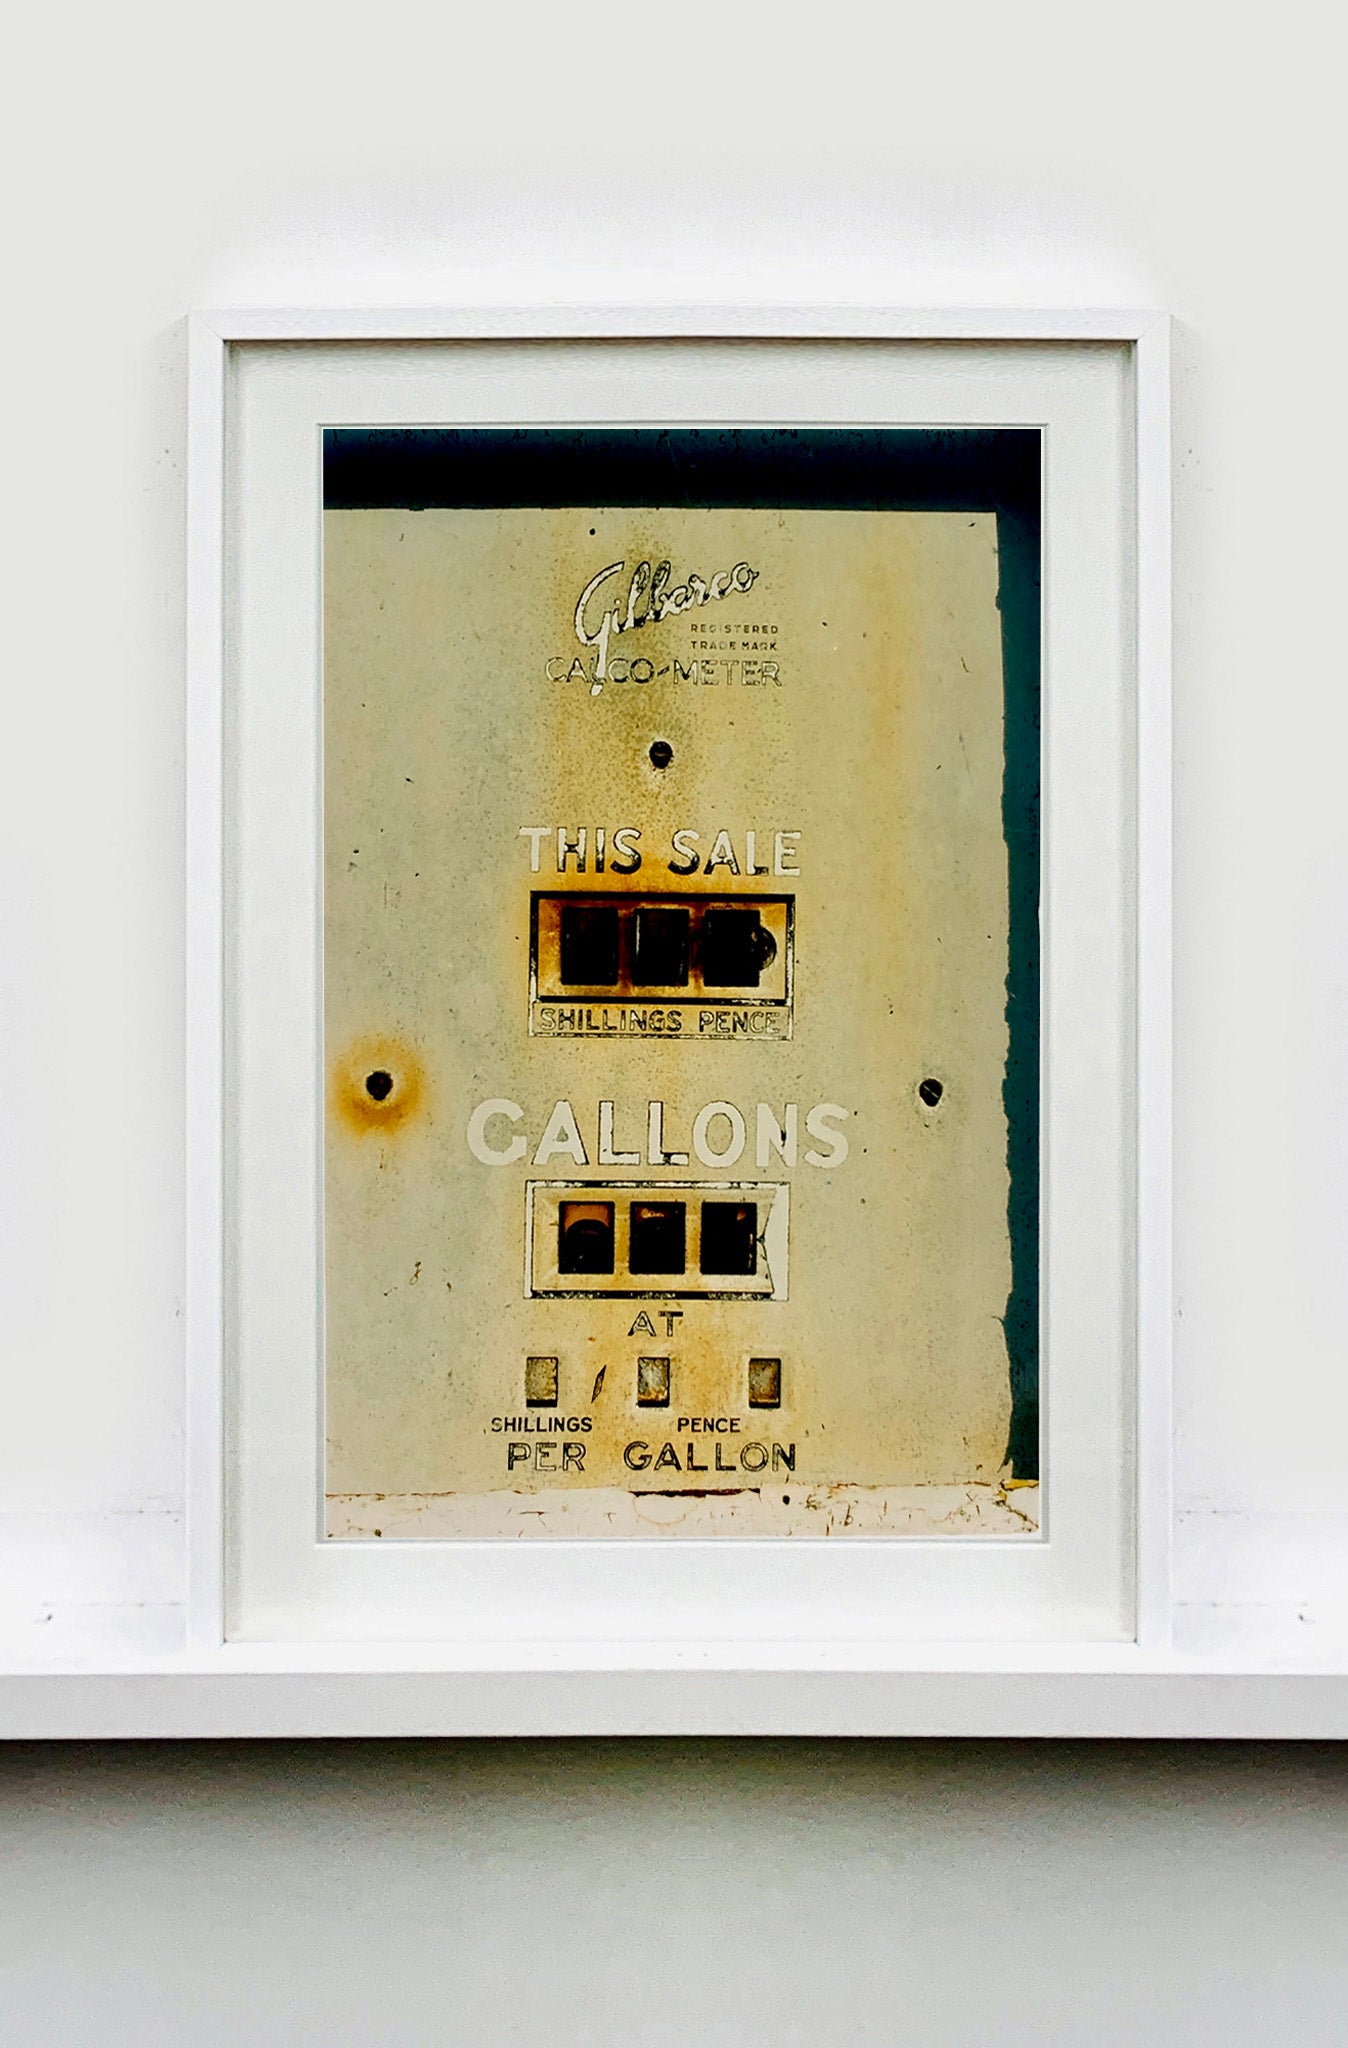 'This Sale' features a vintage petrol pump, something that Richard likes to collect, captured in a Fenland village in the rural area near Richard's home in Cambridge. This artwork is part of his autobiographical series, 'A View of the Fens from the Car with Wings'.